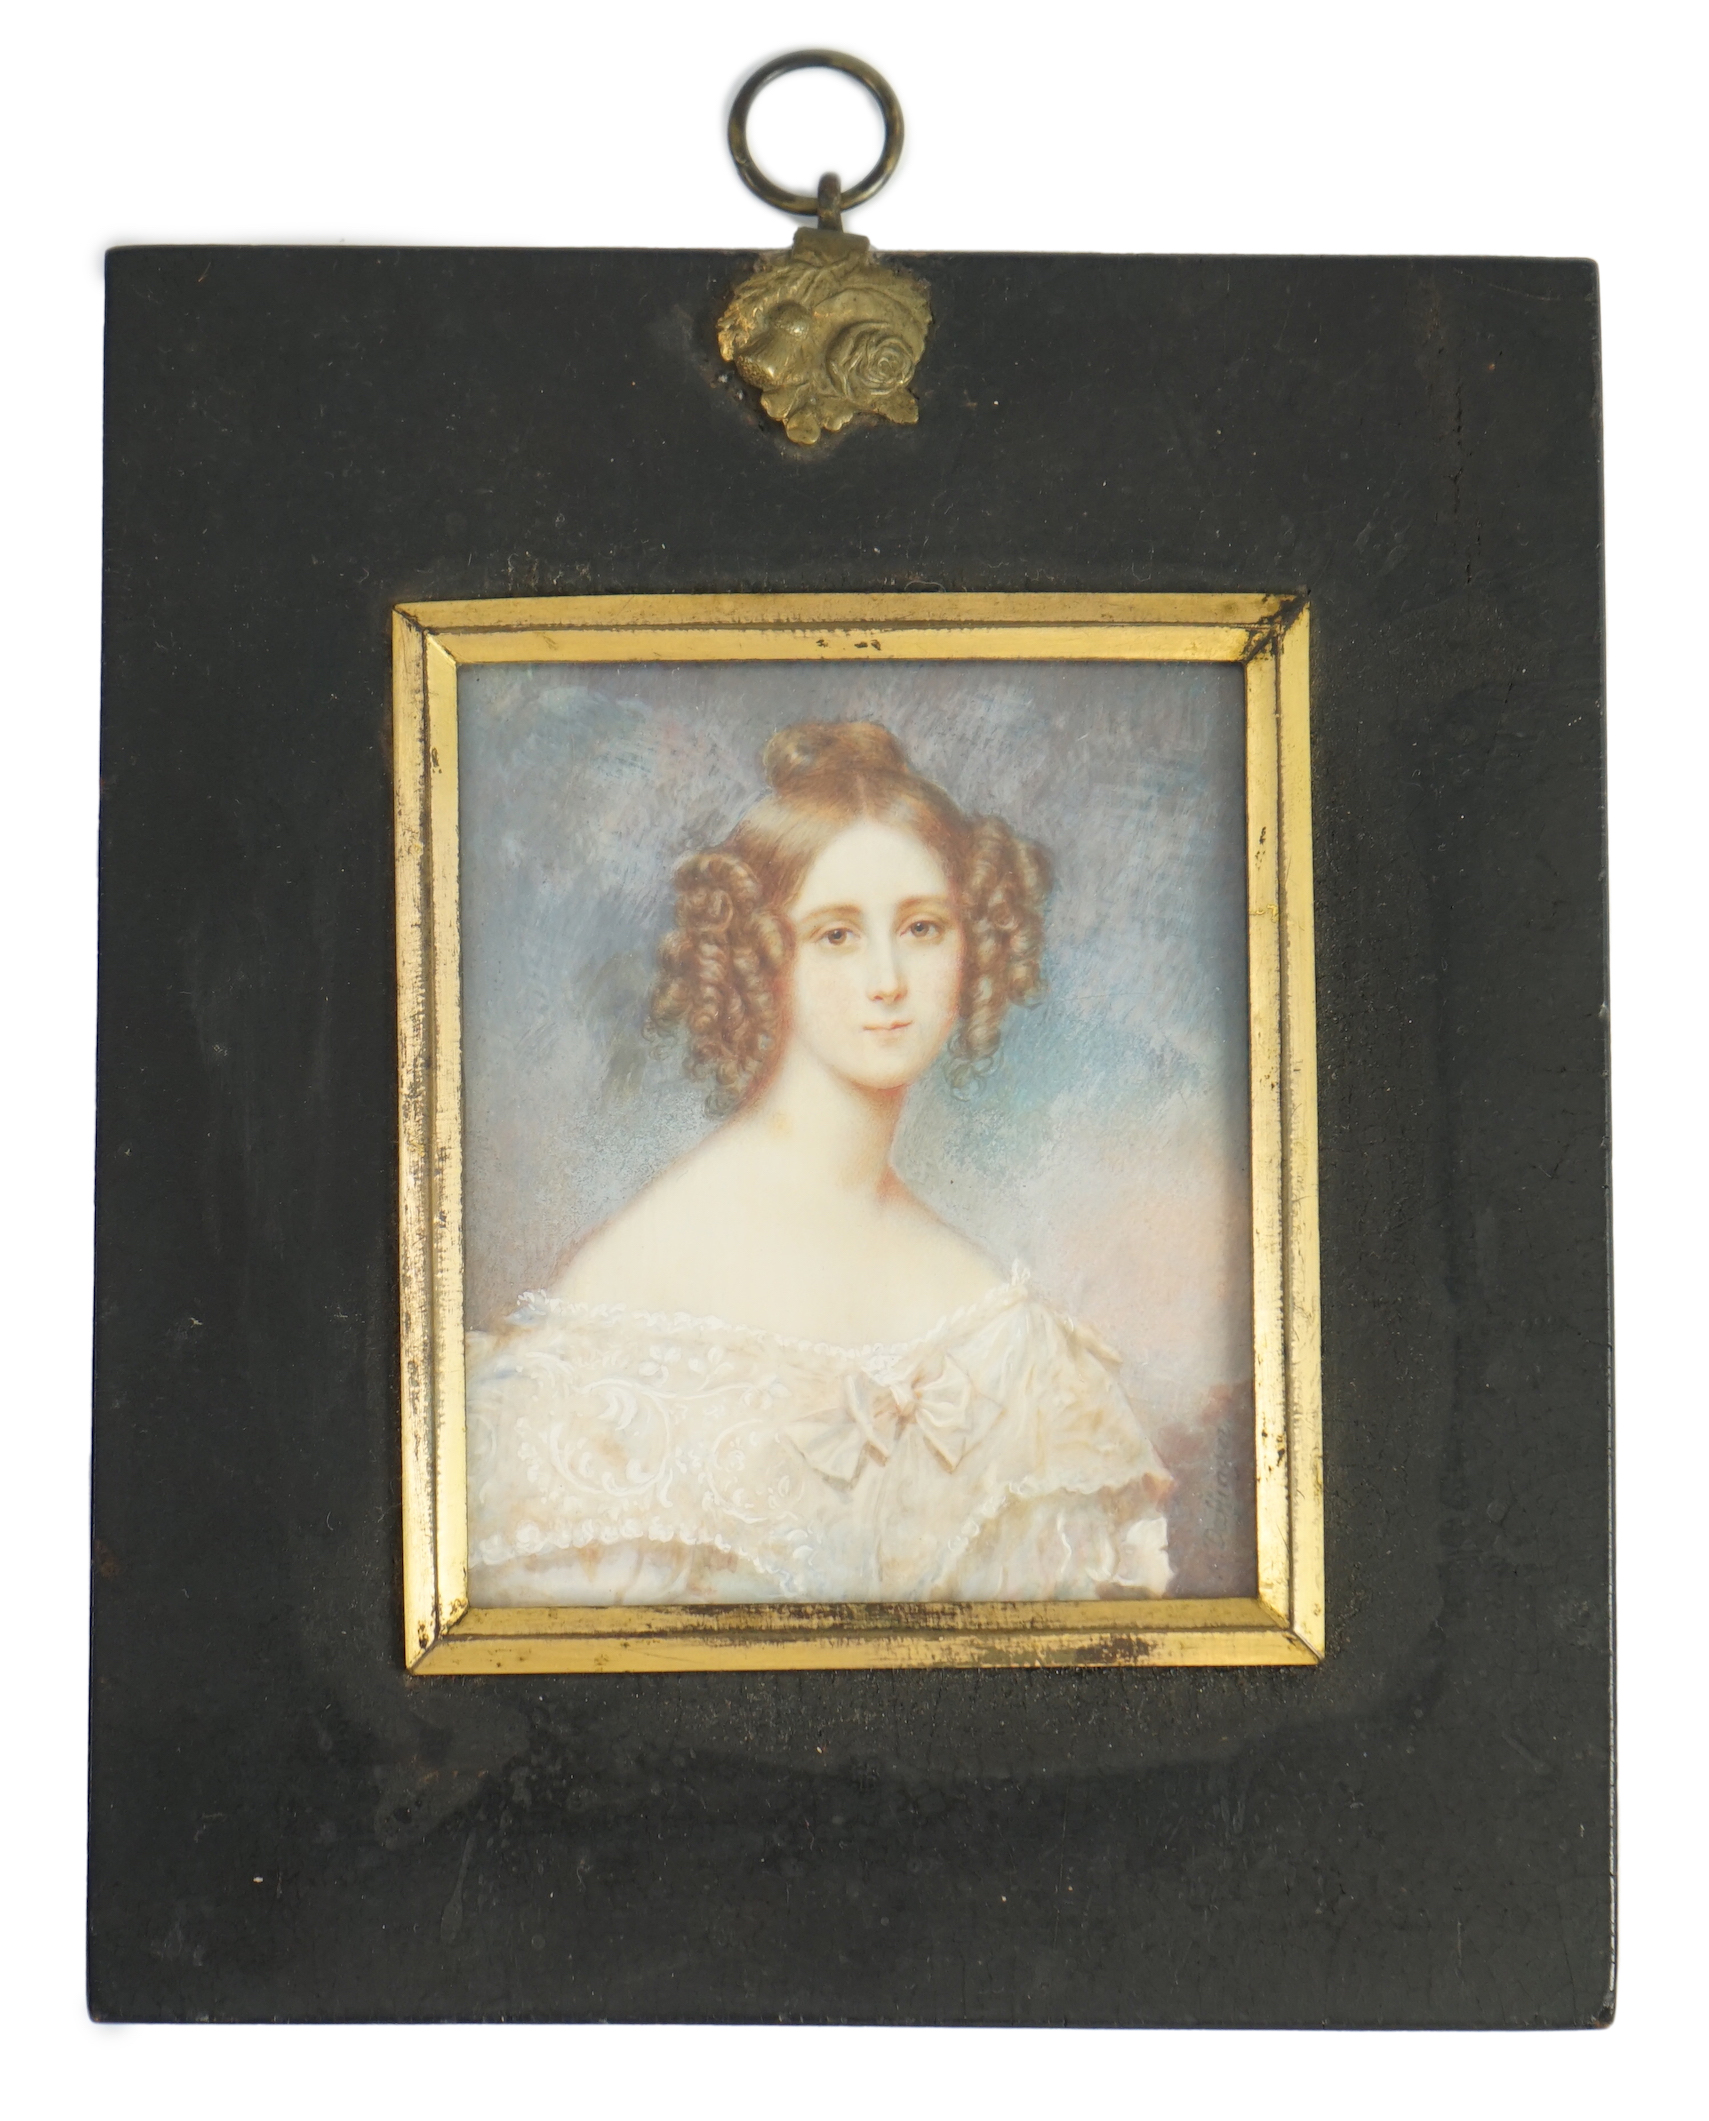 After Moritz Michael Daffinger (1790-1849), Portrait miniature of a young lady wearing a white dress, watercolour on ivory, 8.4 x 7cm. CITES Submission reference Y4E5Y1TG